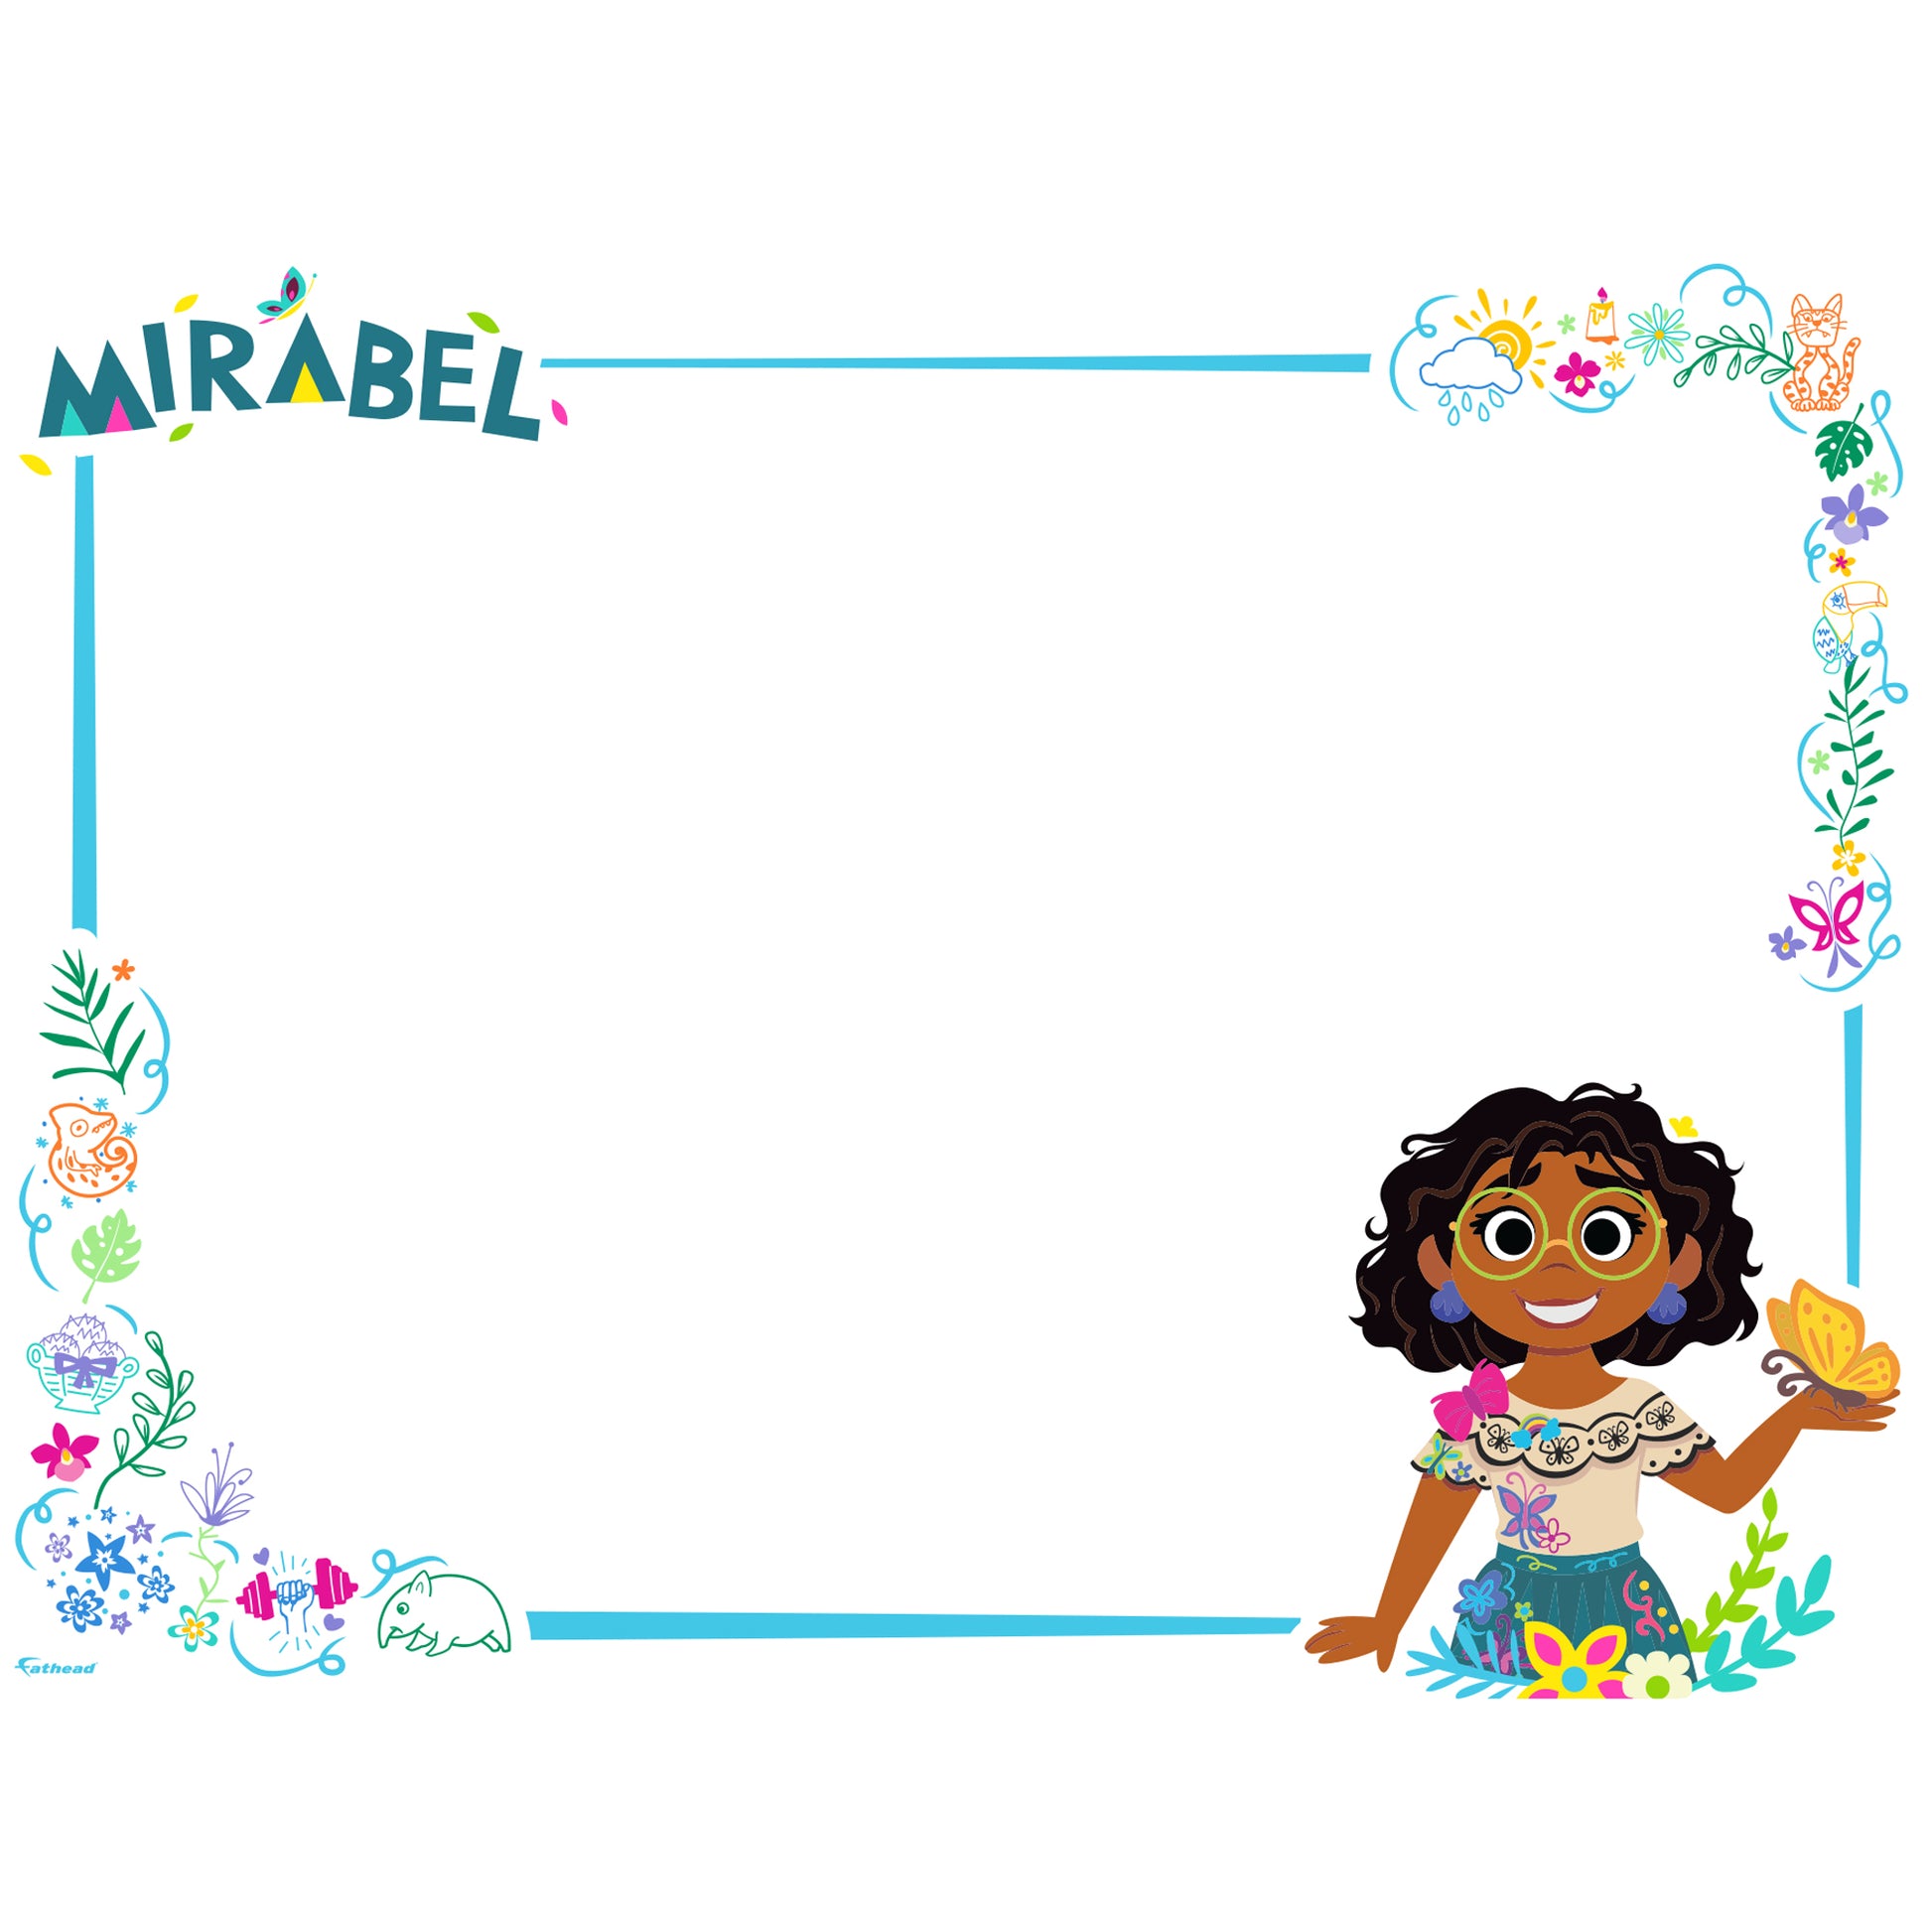 Mirabel Madrigal from Encanto Official Disney Cardboard Cutout / Standee